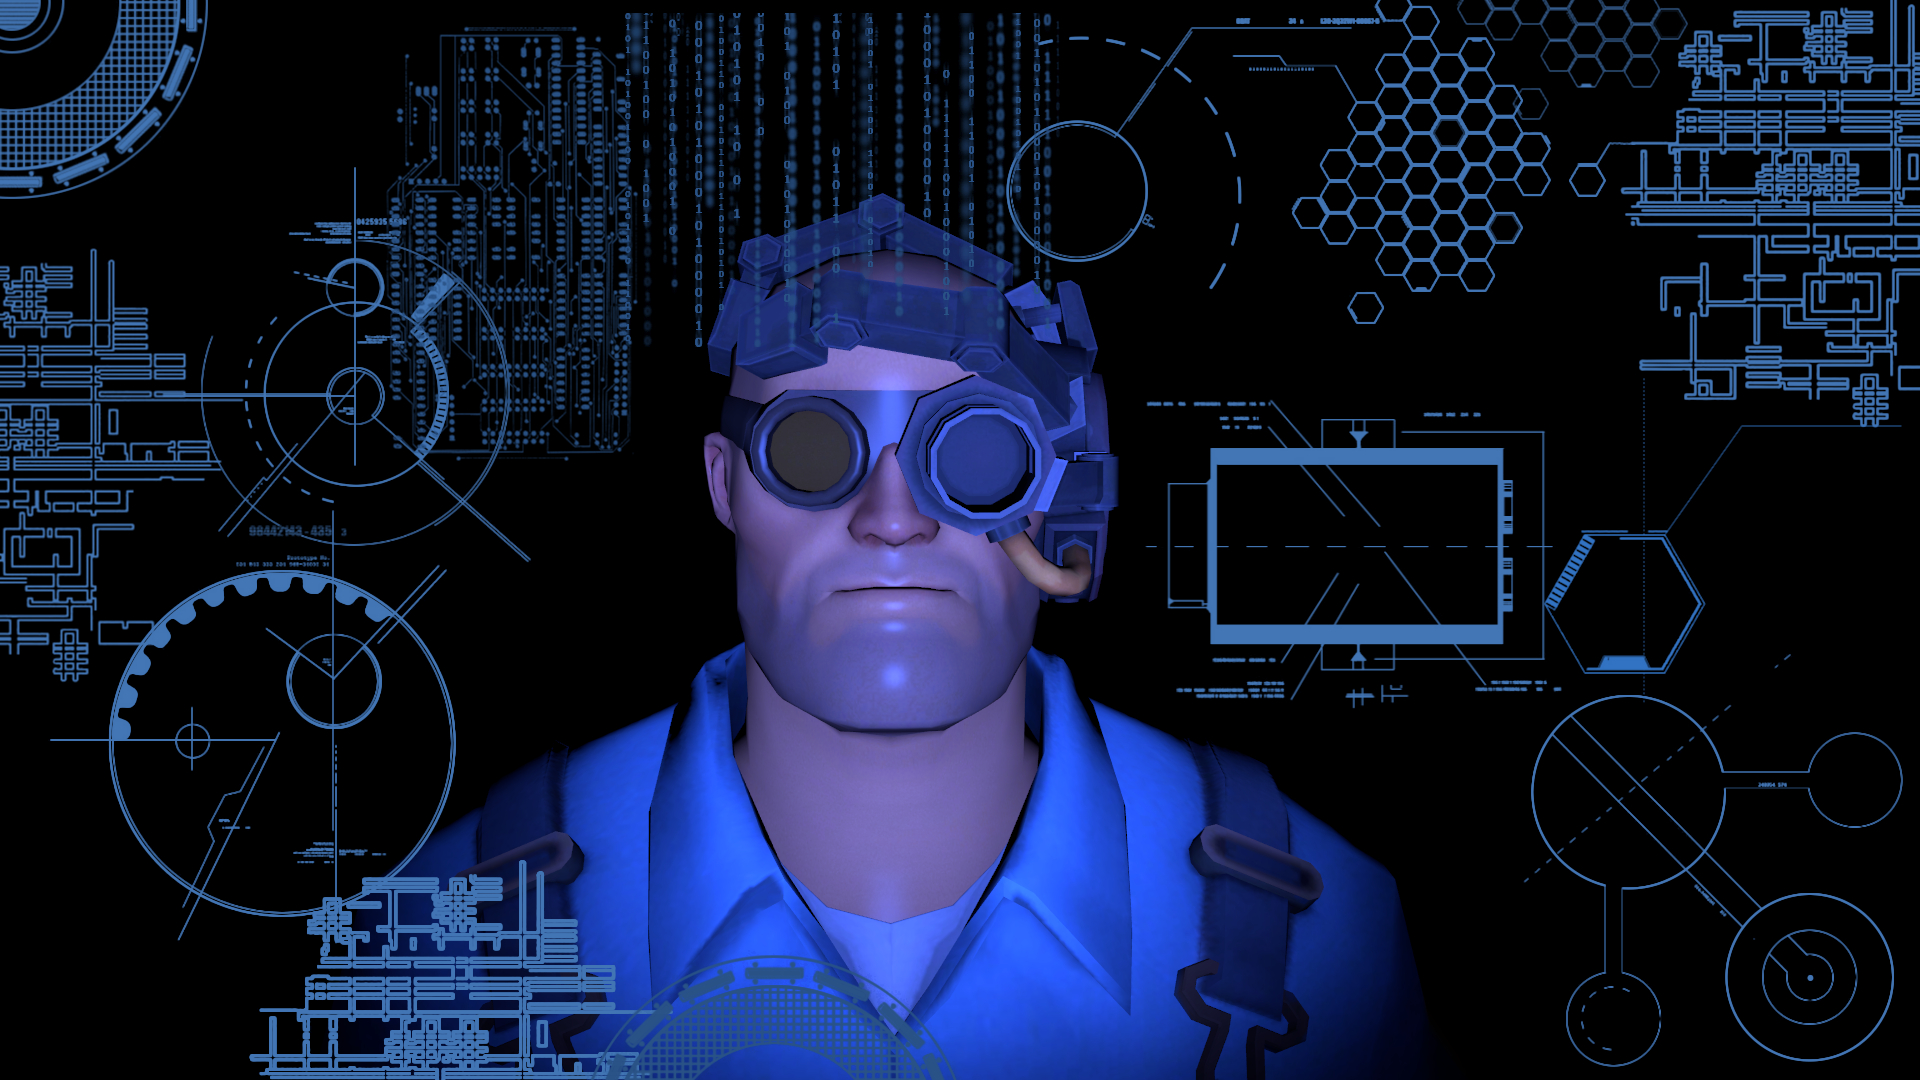 Engineer Team Fortress Team Fortress 2 1920x1080